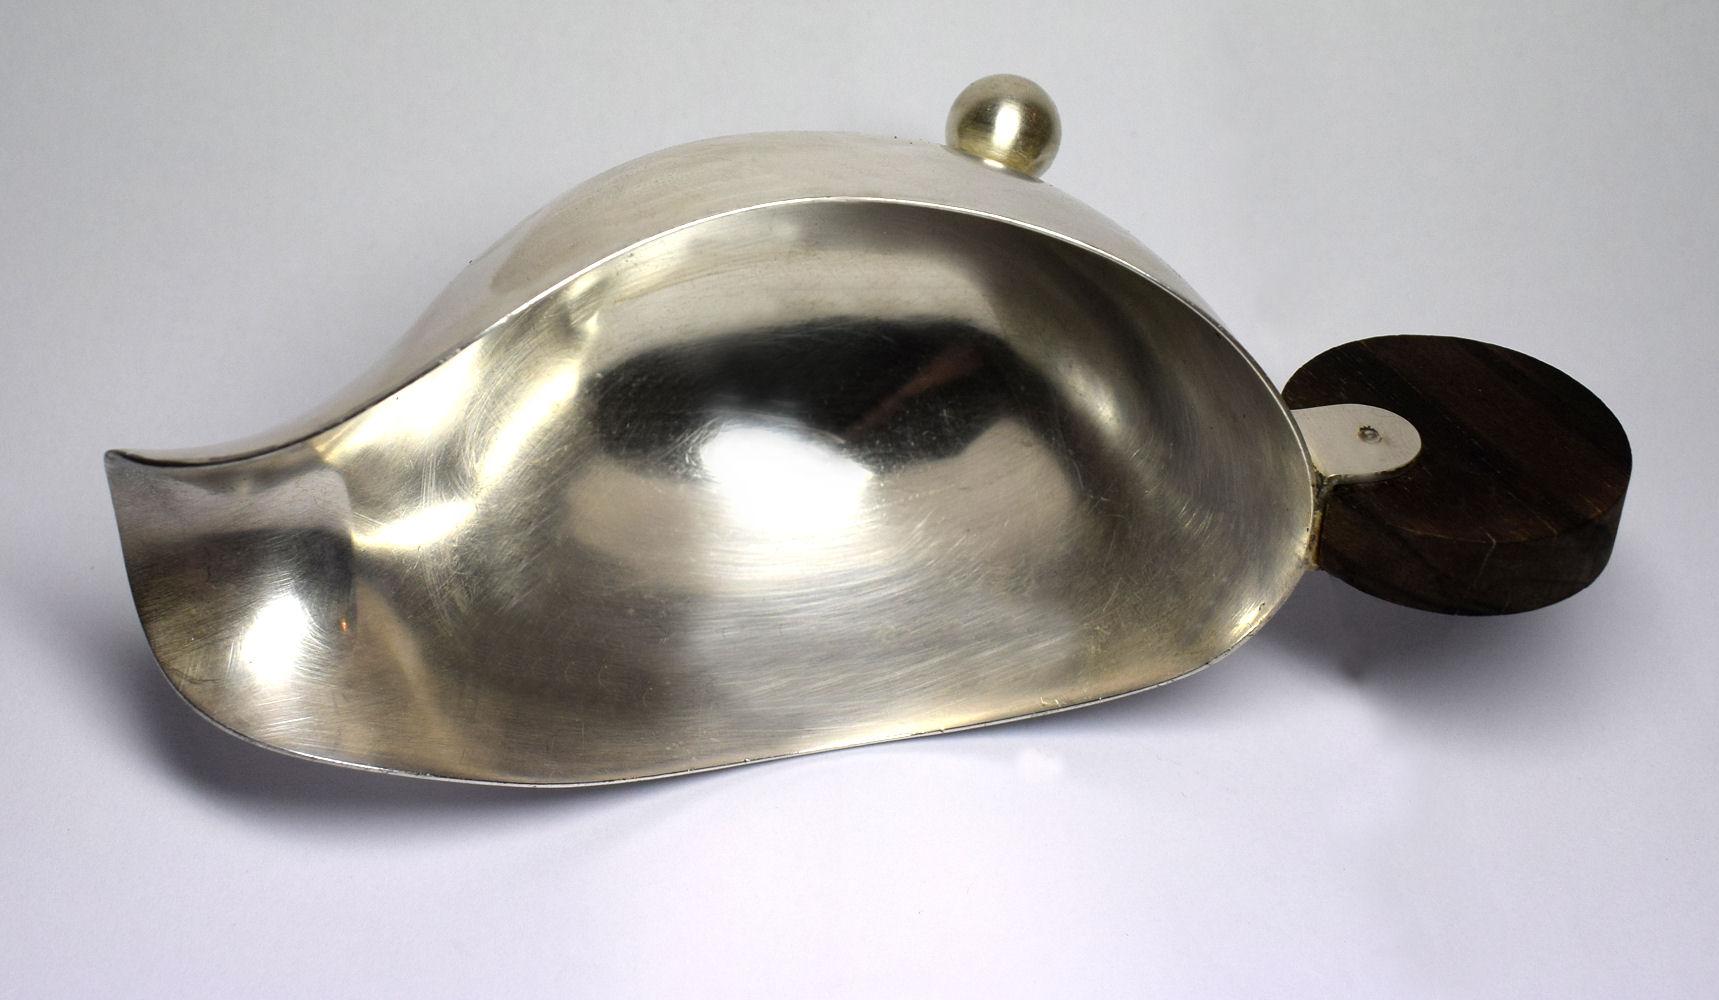 Art Deco Modernist Silver Plated Sauce Boat In Good Condition For Sale In Devon, England